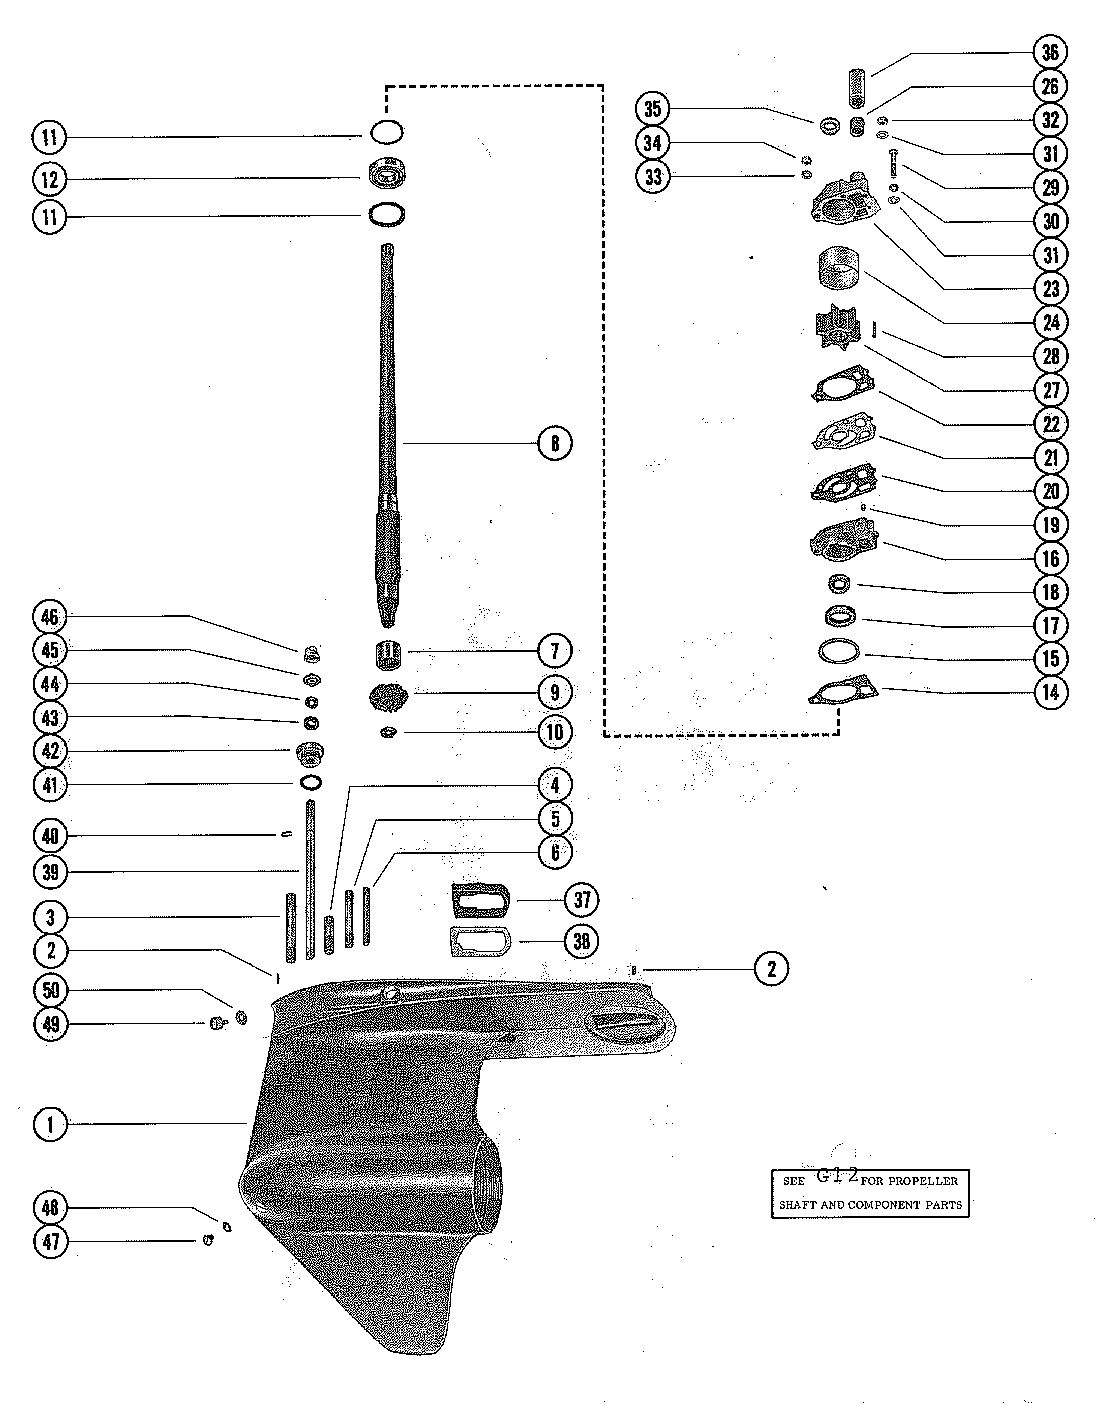 MARINER MARINER 85 GEAR HOUSING ASSEMBLY, COMPLETE (PAGE 1)